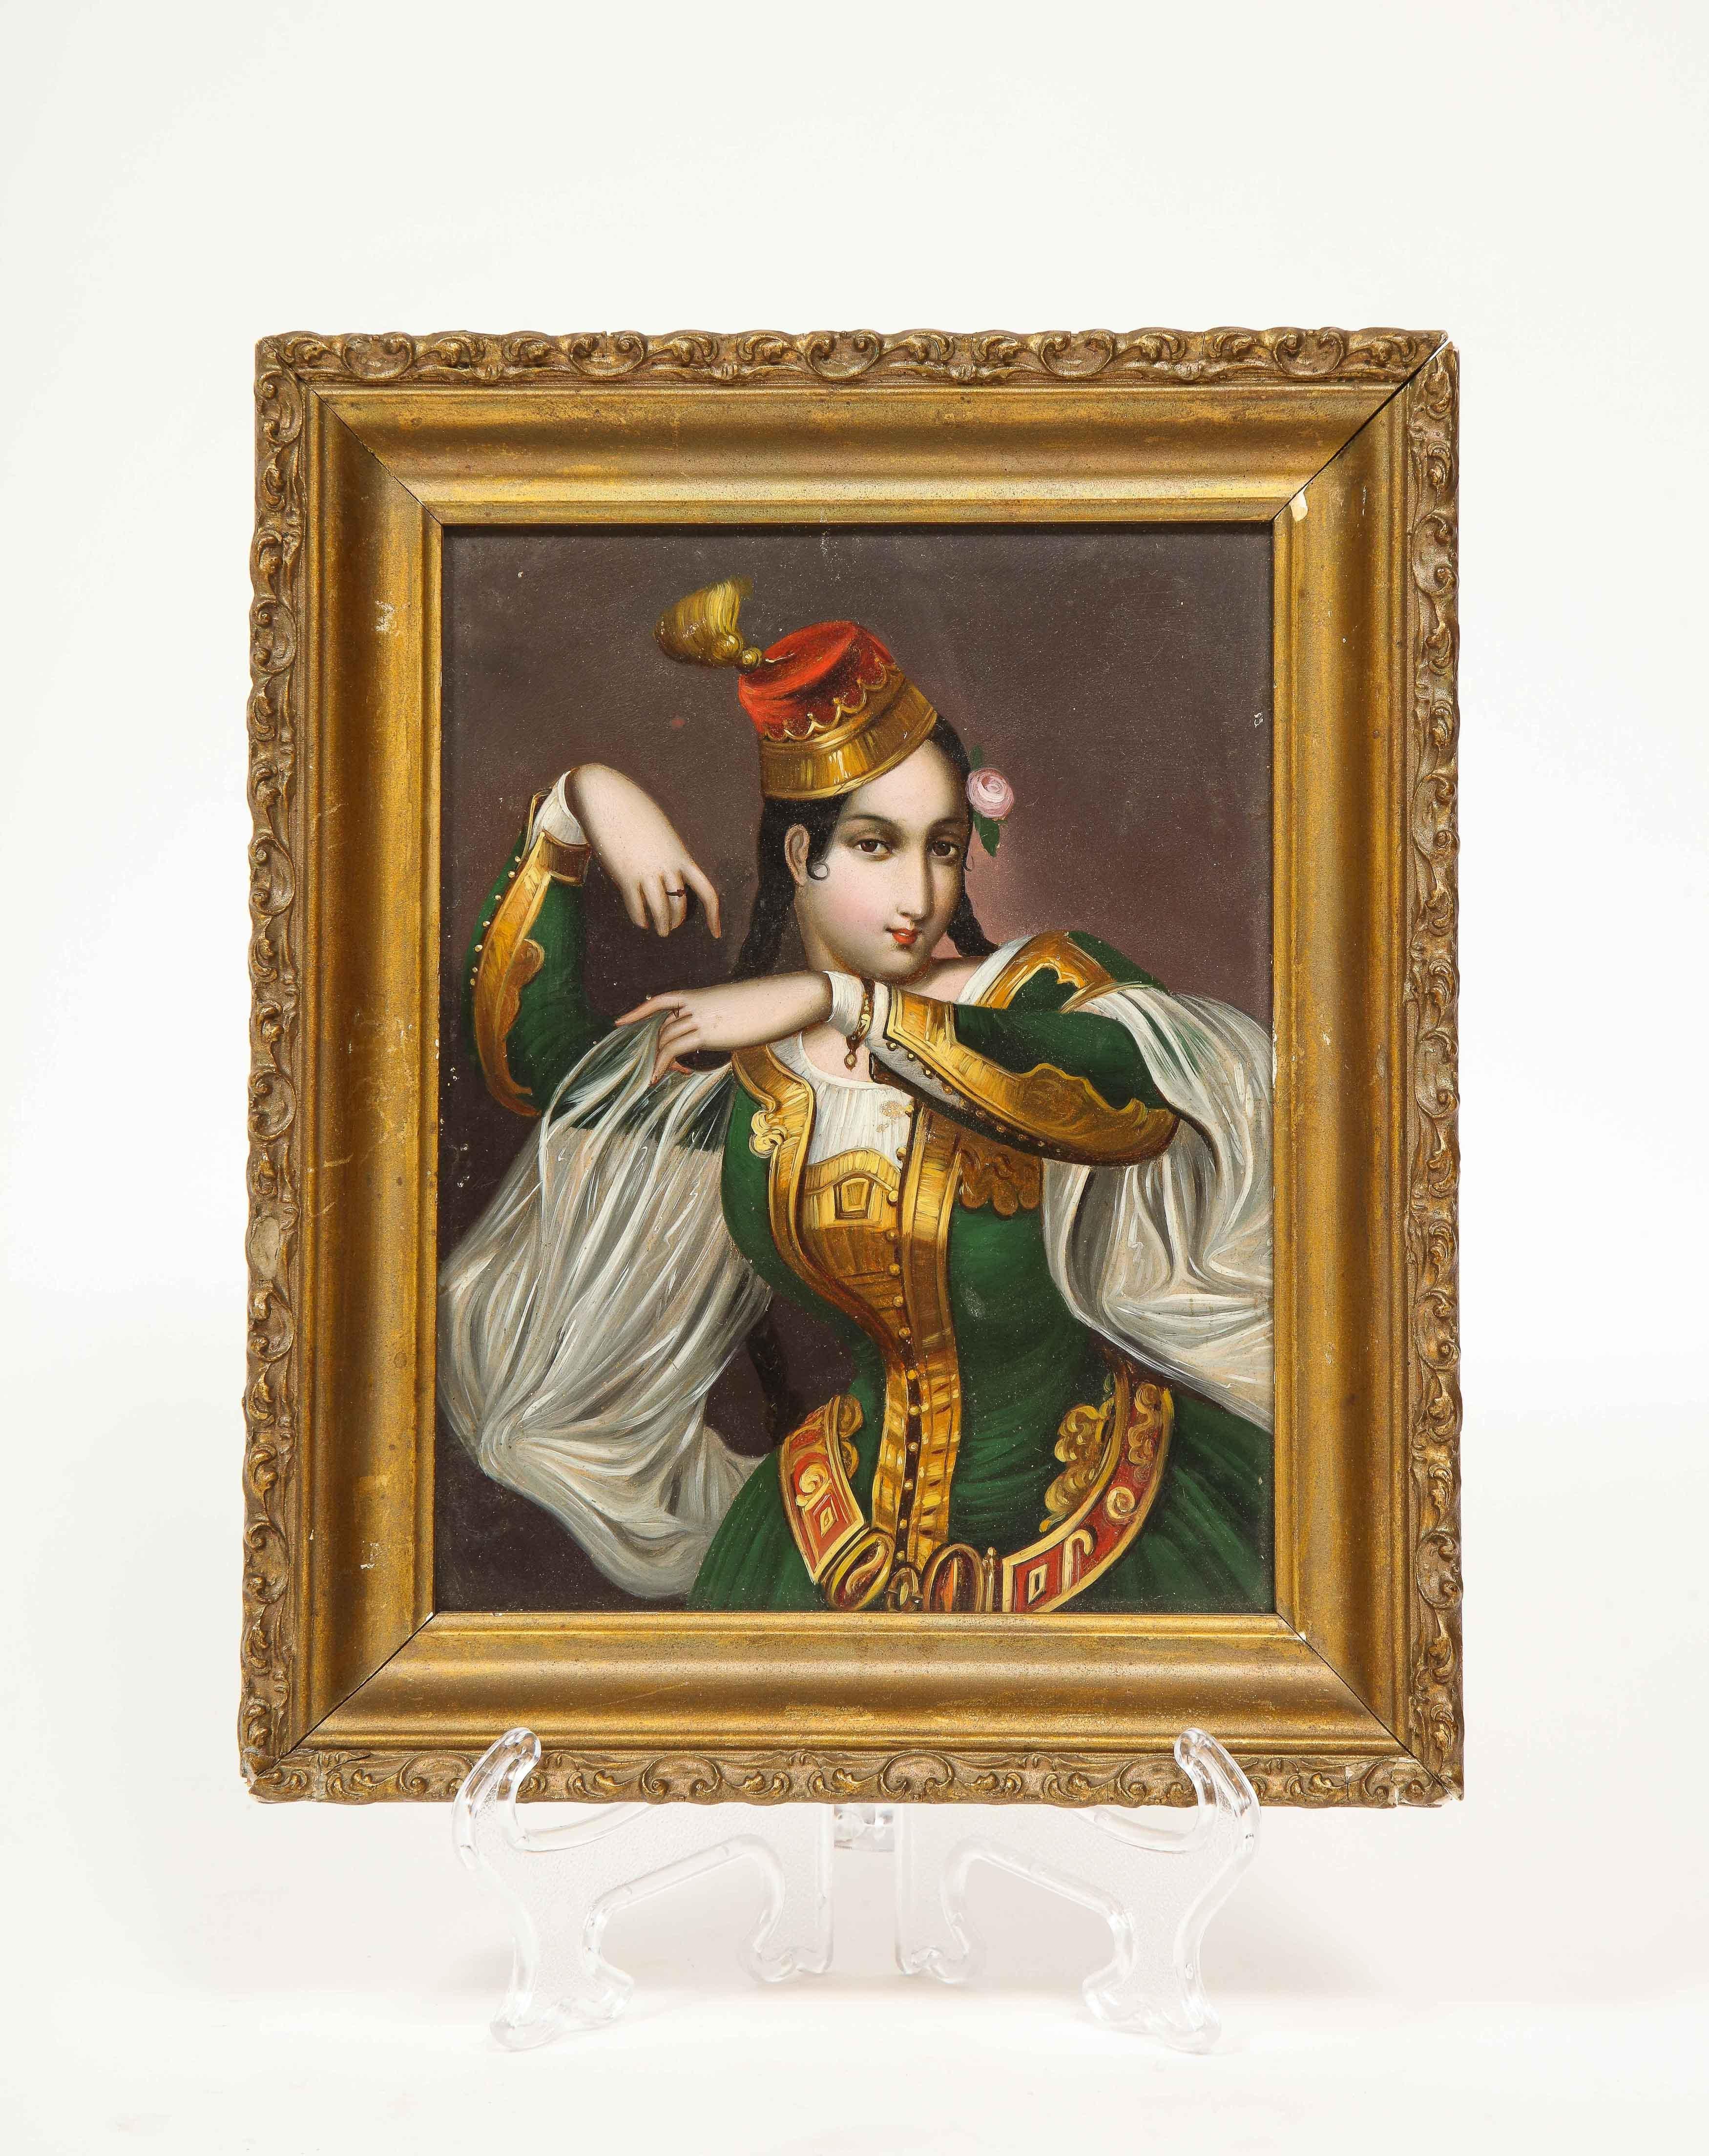 An exceptional quality miniature painting of an orientalist dancer, 19th century, circa 1860

Depicting an orientalist Turkish dancer in green attire with her hat in original giltwood frame.

Painted on panel. 

Panel size: 6.5